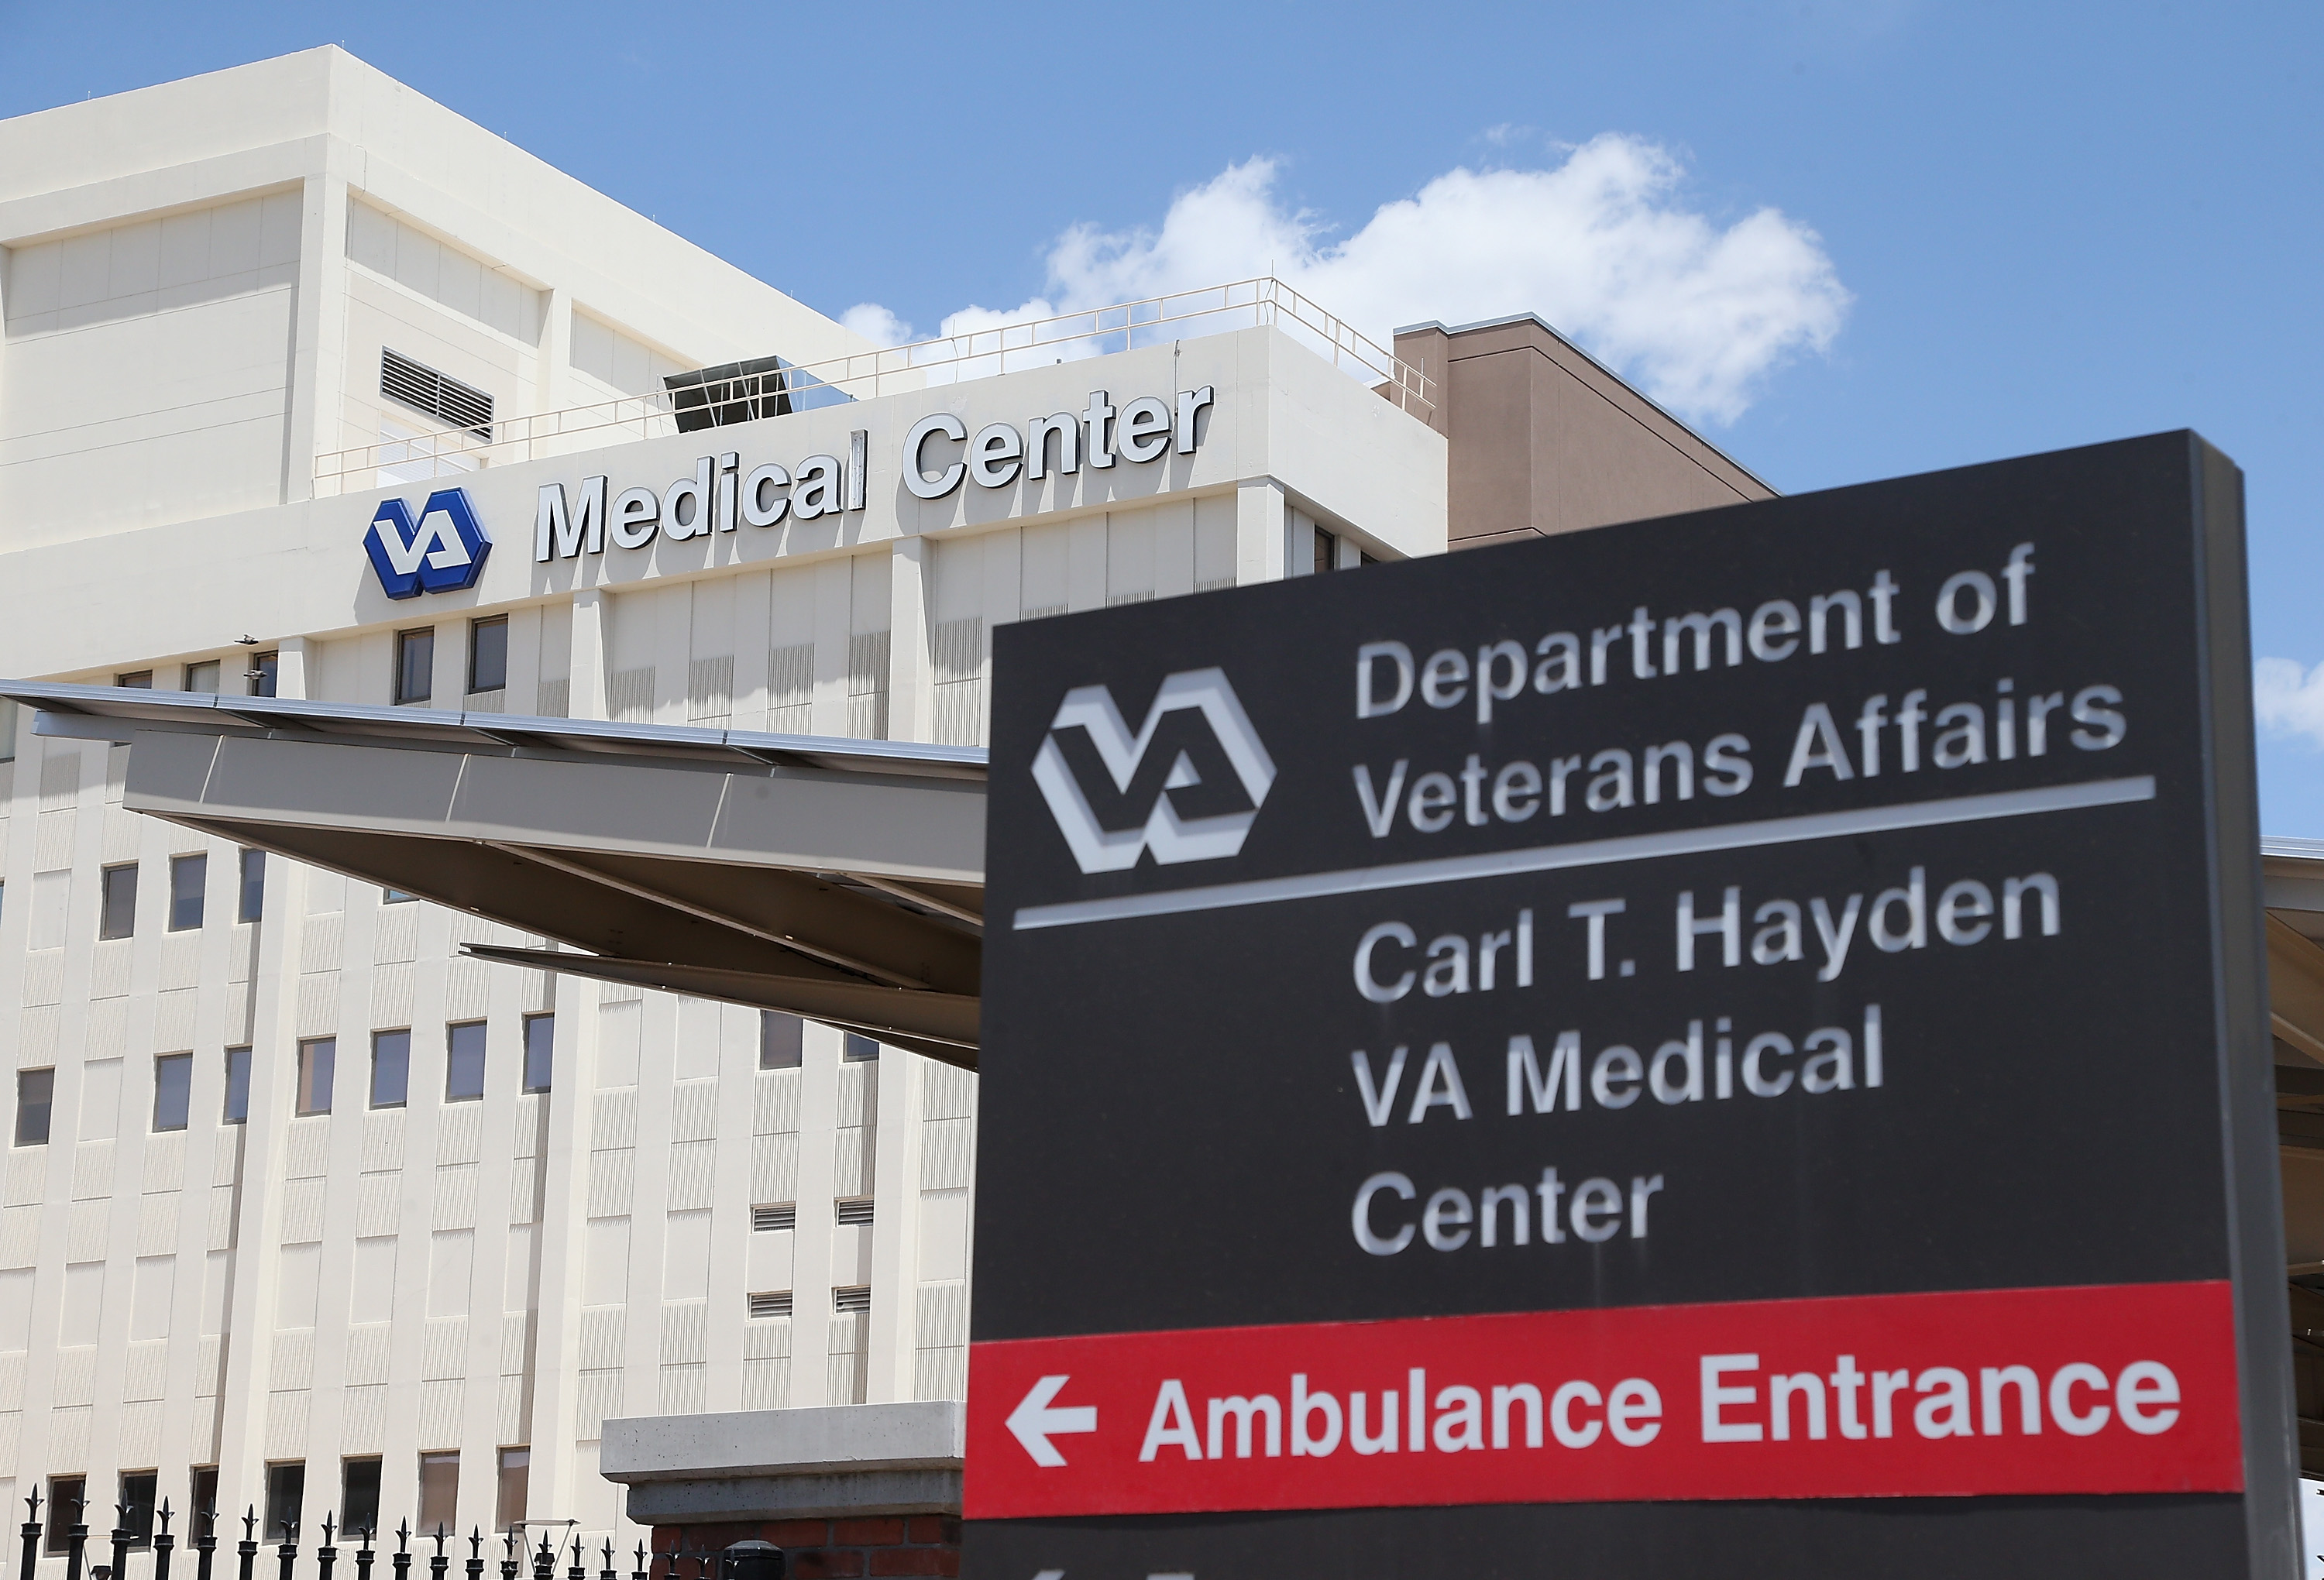 The Veterans Affairs Medical Center on May 8, 2014 in Phoenix, Arizona. (Christian Petersen—Getty Images)